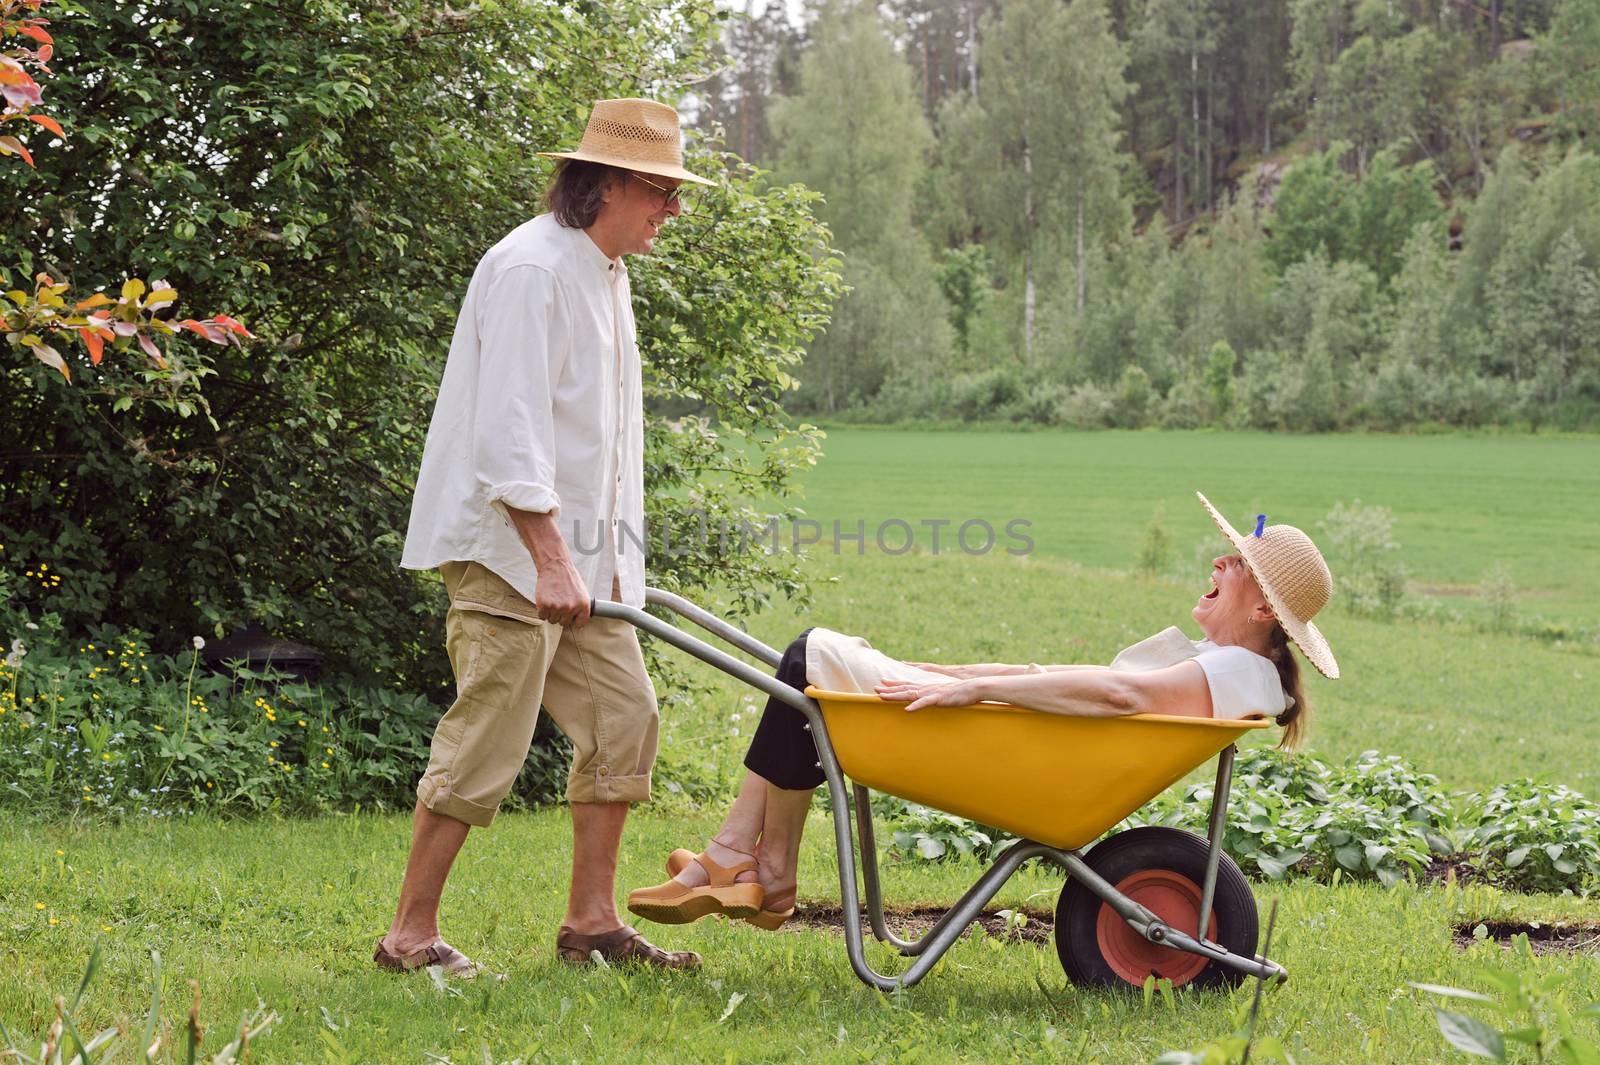 Senior man carries a senior woman in a wheelbarrow outdoors near a vegetable patch. They're laughing and having fun.